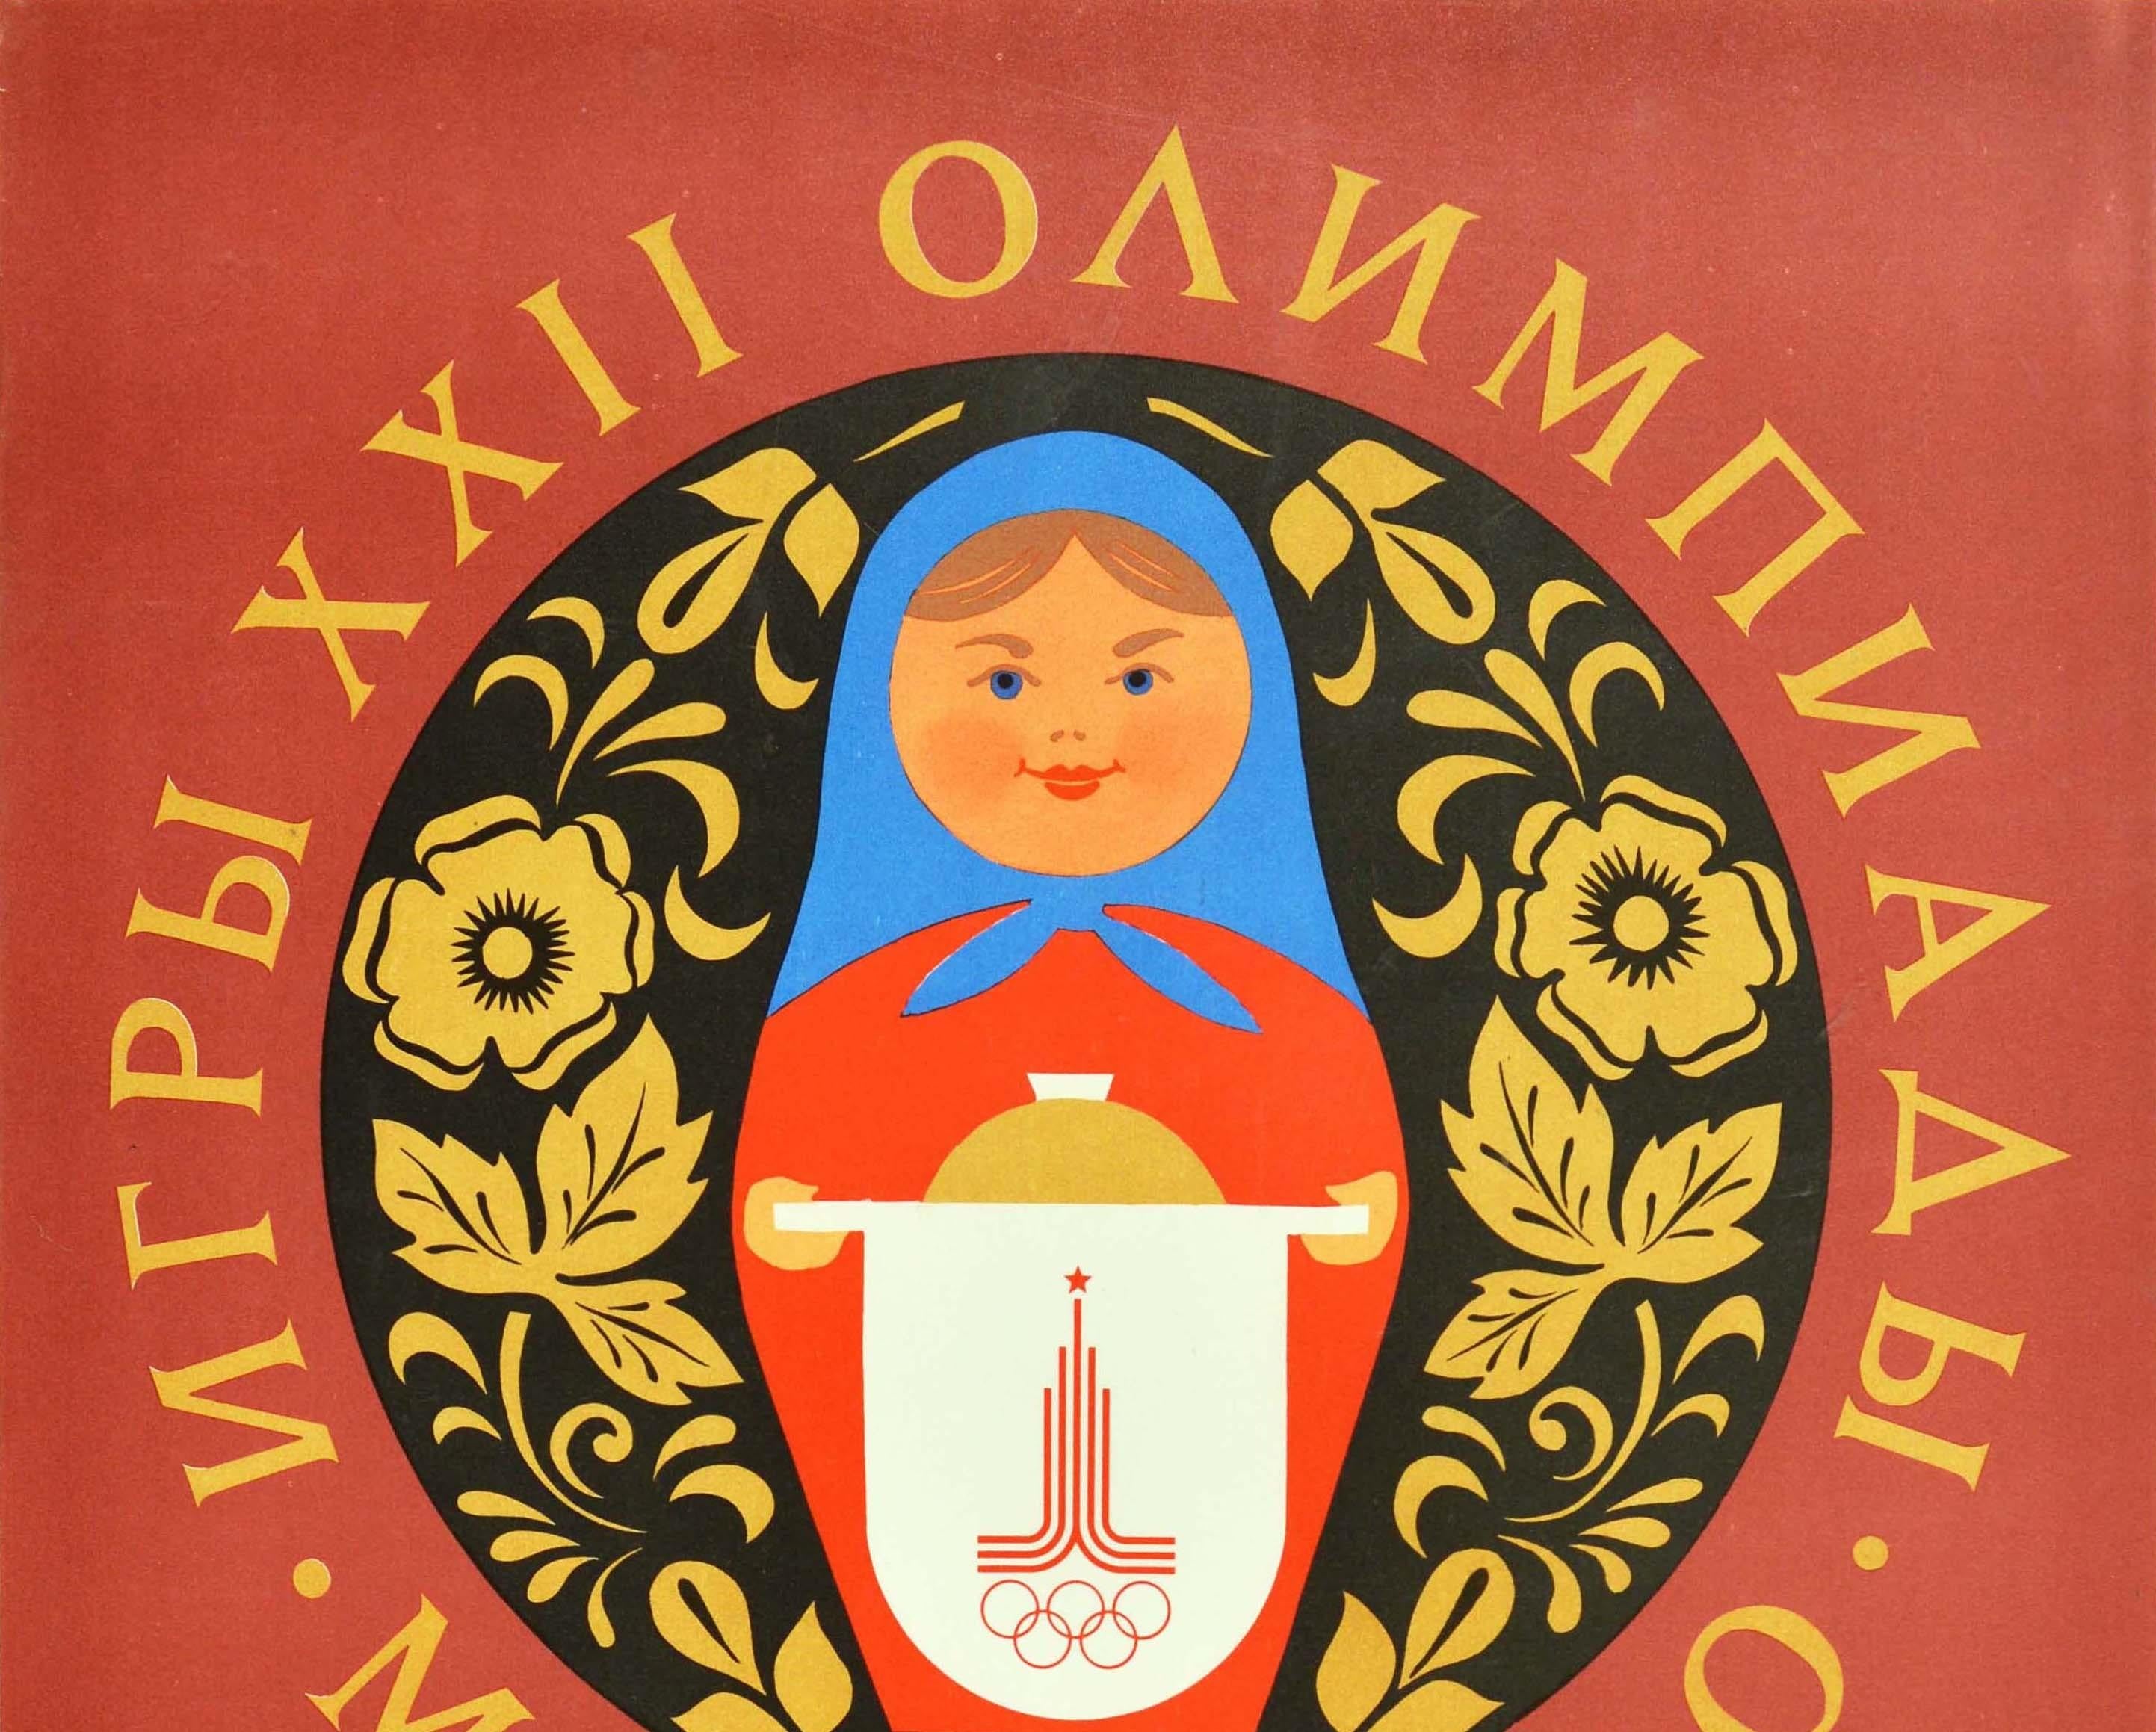 Original vintage Soviet sports poster for the 22nd Summer Olympic Games / Games of the XXII Olympiad in 1980 held in Moscow Russia featuring a great design with a traditional Russian matryoshka doll smiling at the viewer and holding up a loaf of